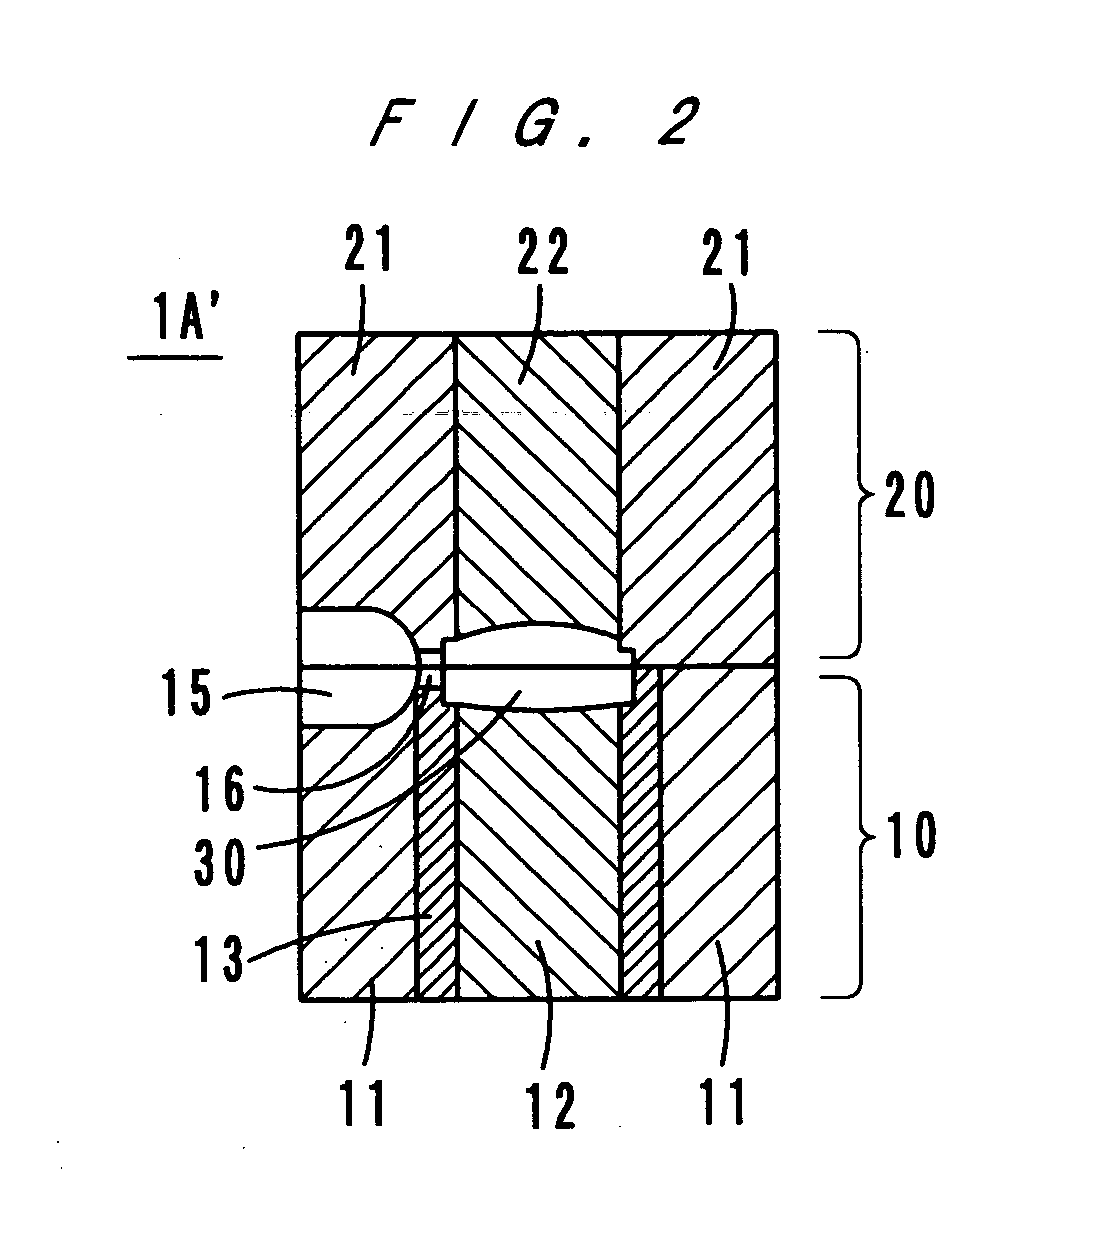 Injection mold and injection molding apparatus